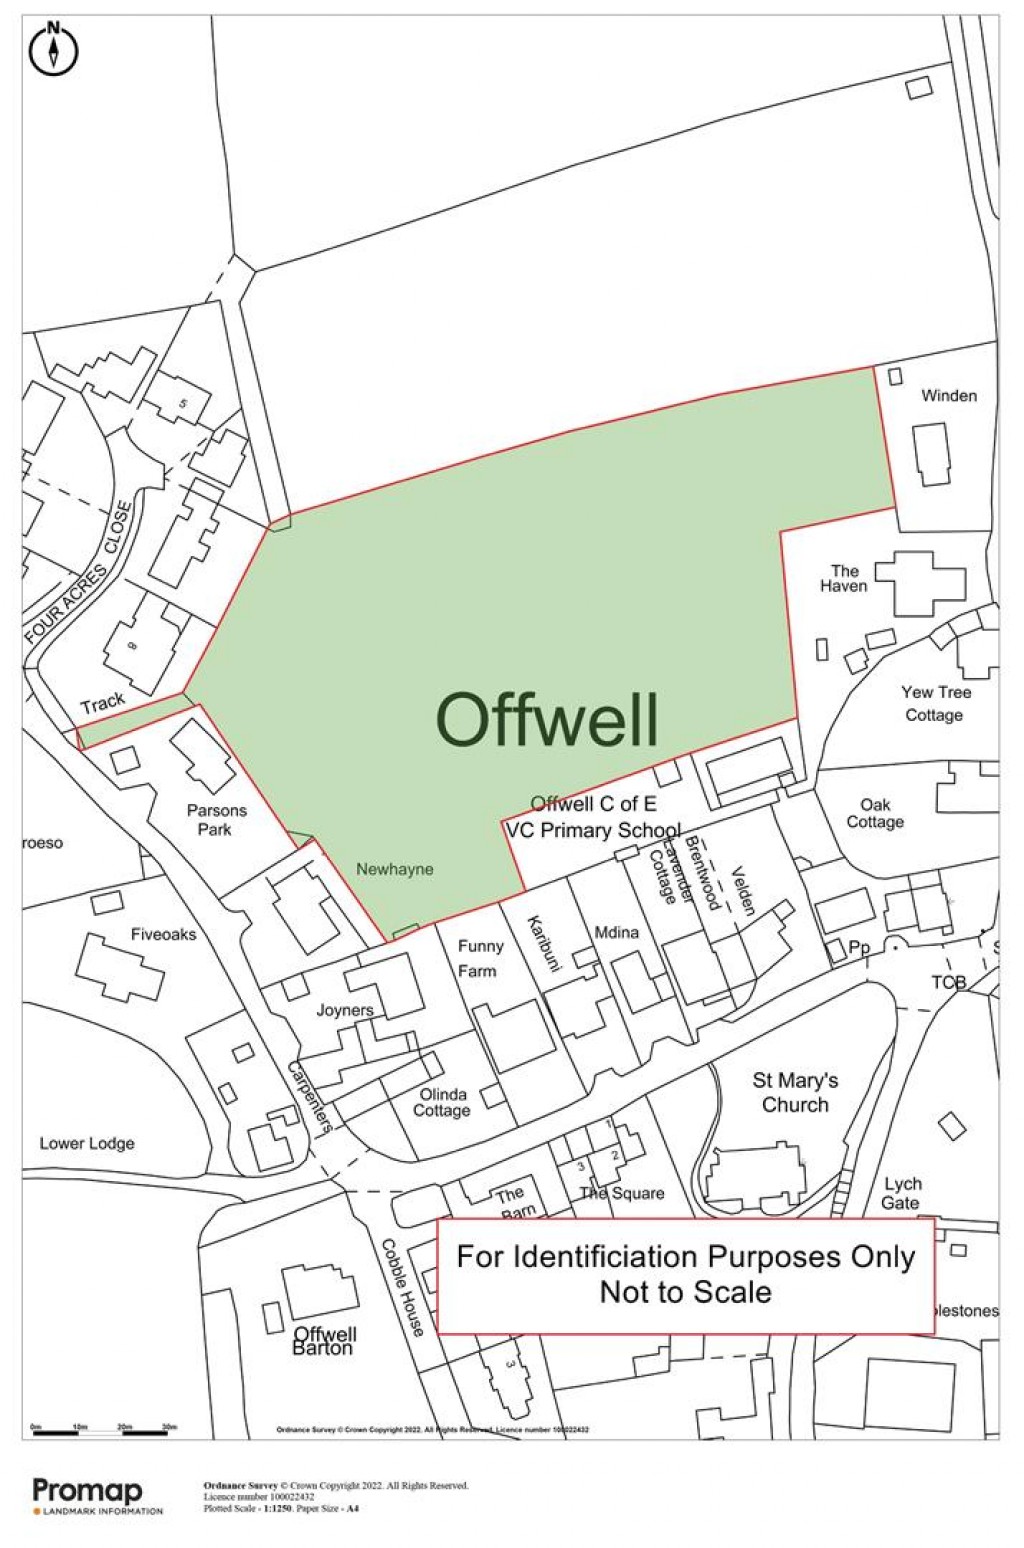 Floorplans For Offwell, Honiton